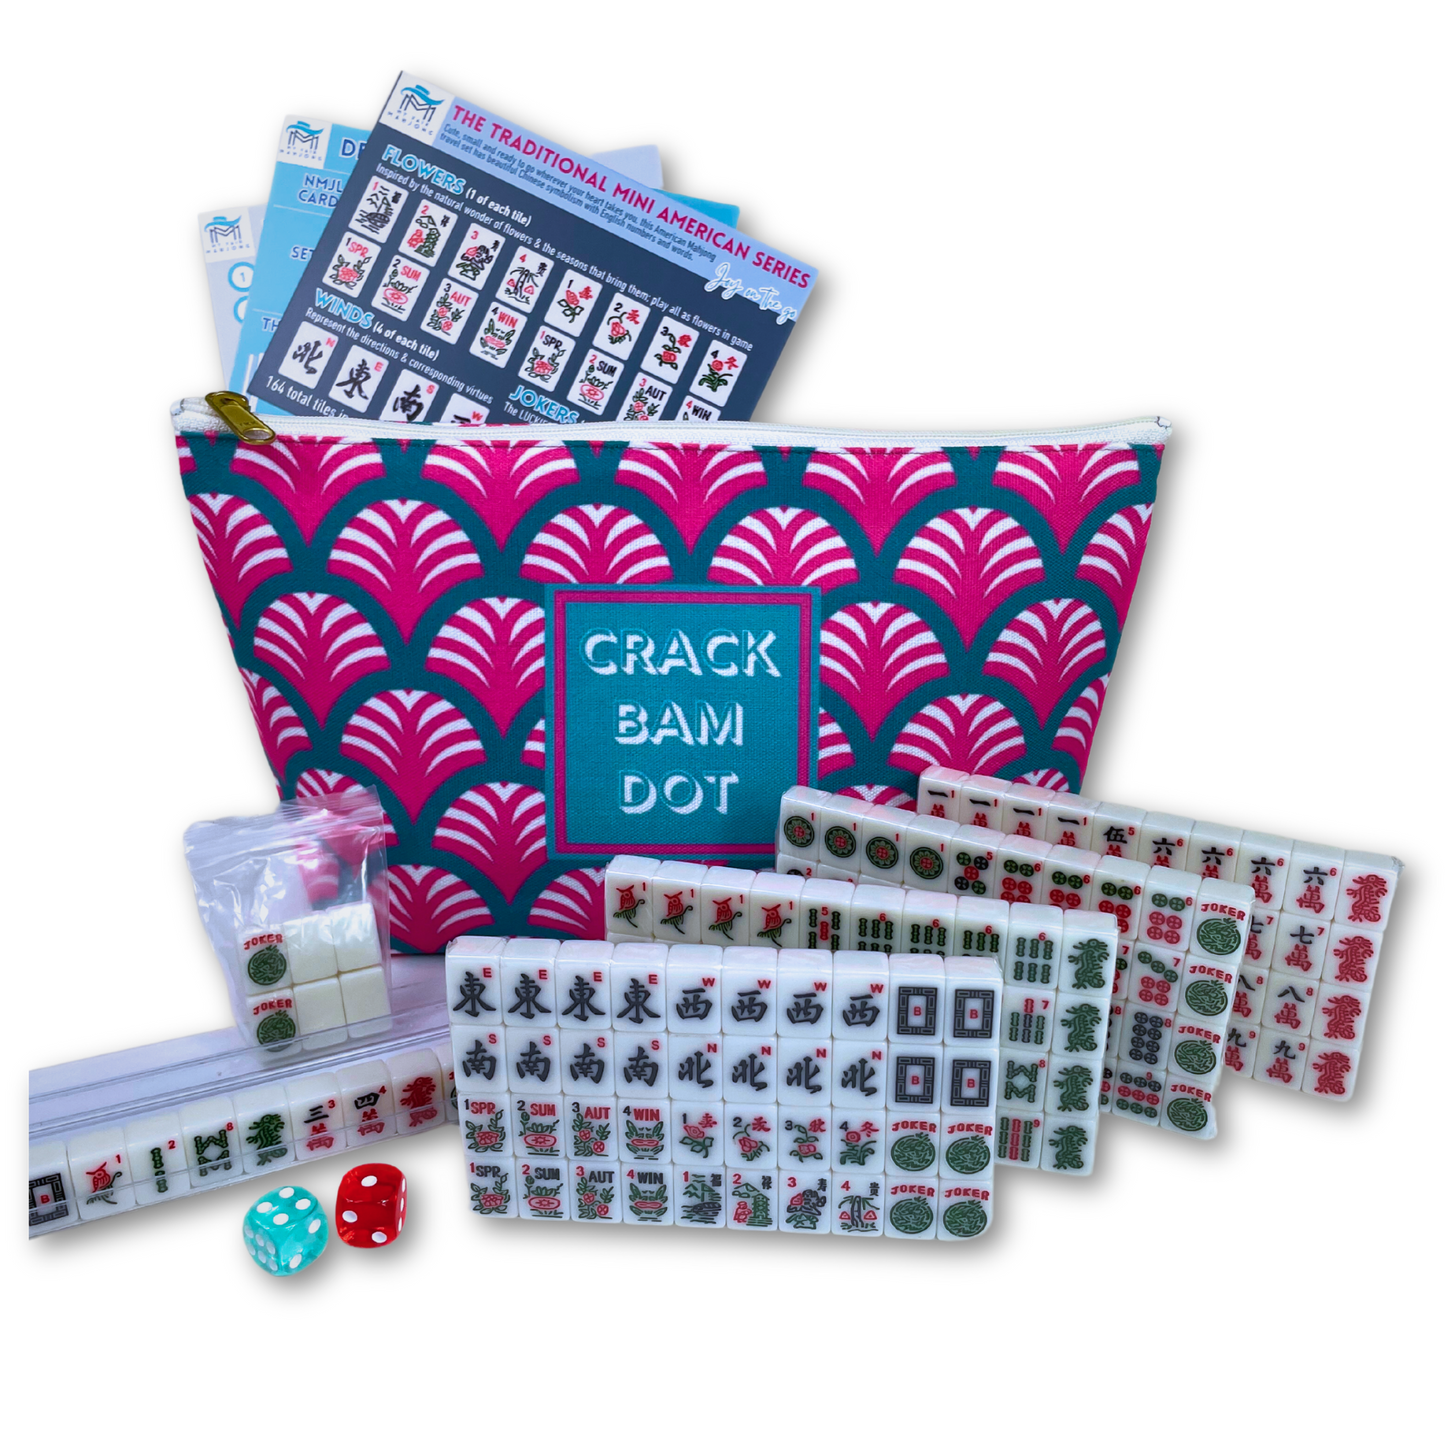 Mahjong Traditional Mini American Series Travel American Mahjongg Tile Set of 166 melamine white tiles, bright pink and teal bag, custom instruction and tips card, 2 colorful dice